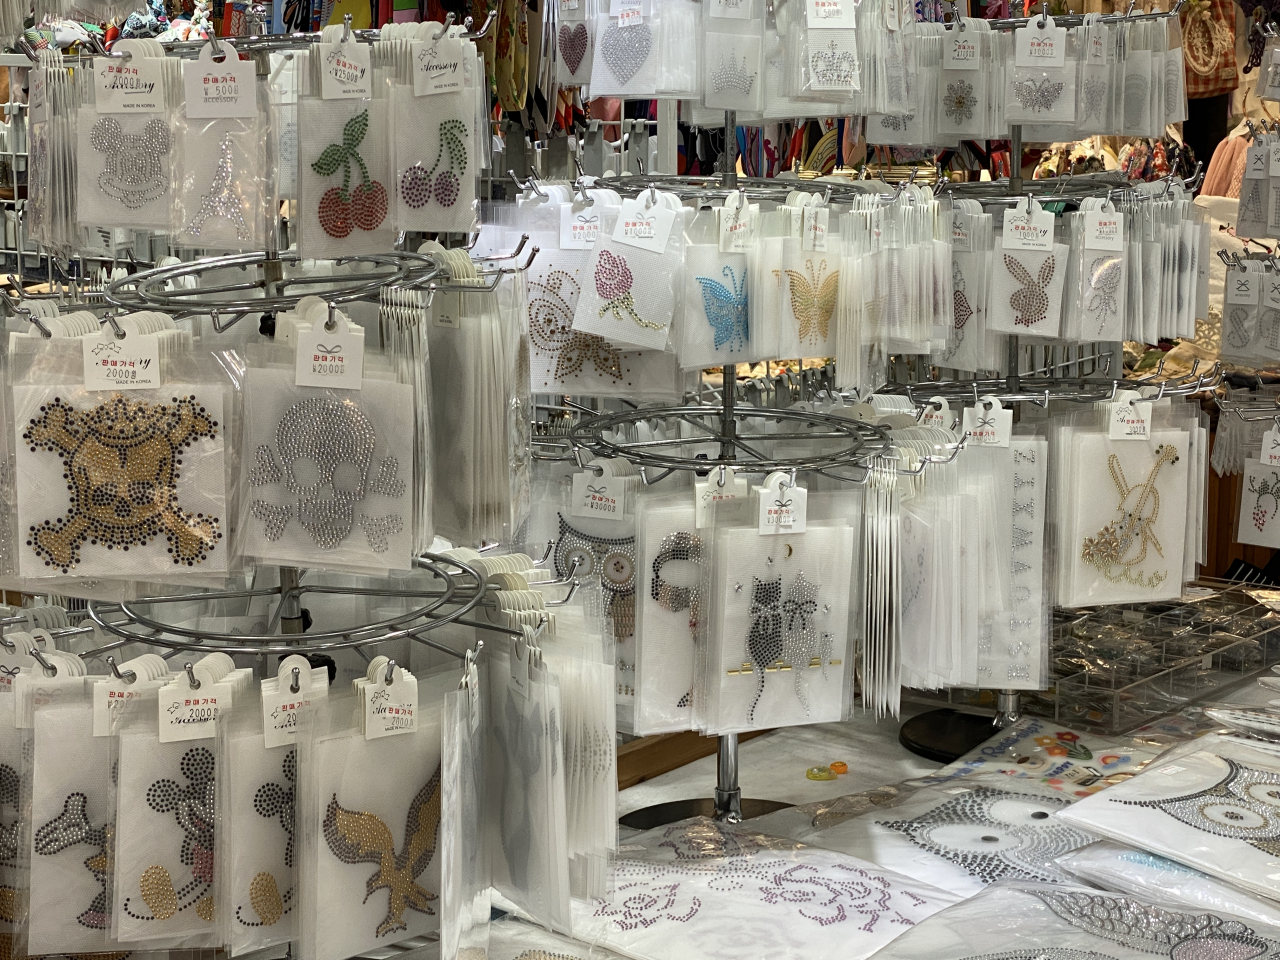 A variety of glitter stickers are hung on the stand. (Hwang Joo-young/The Korea Herald)